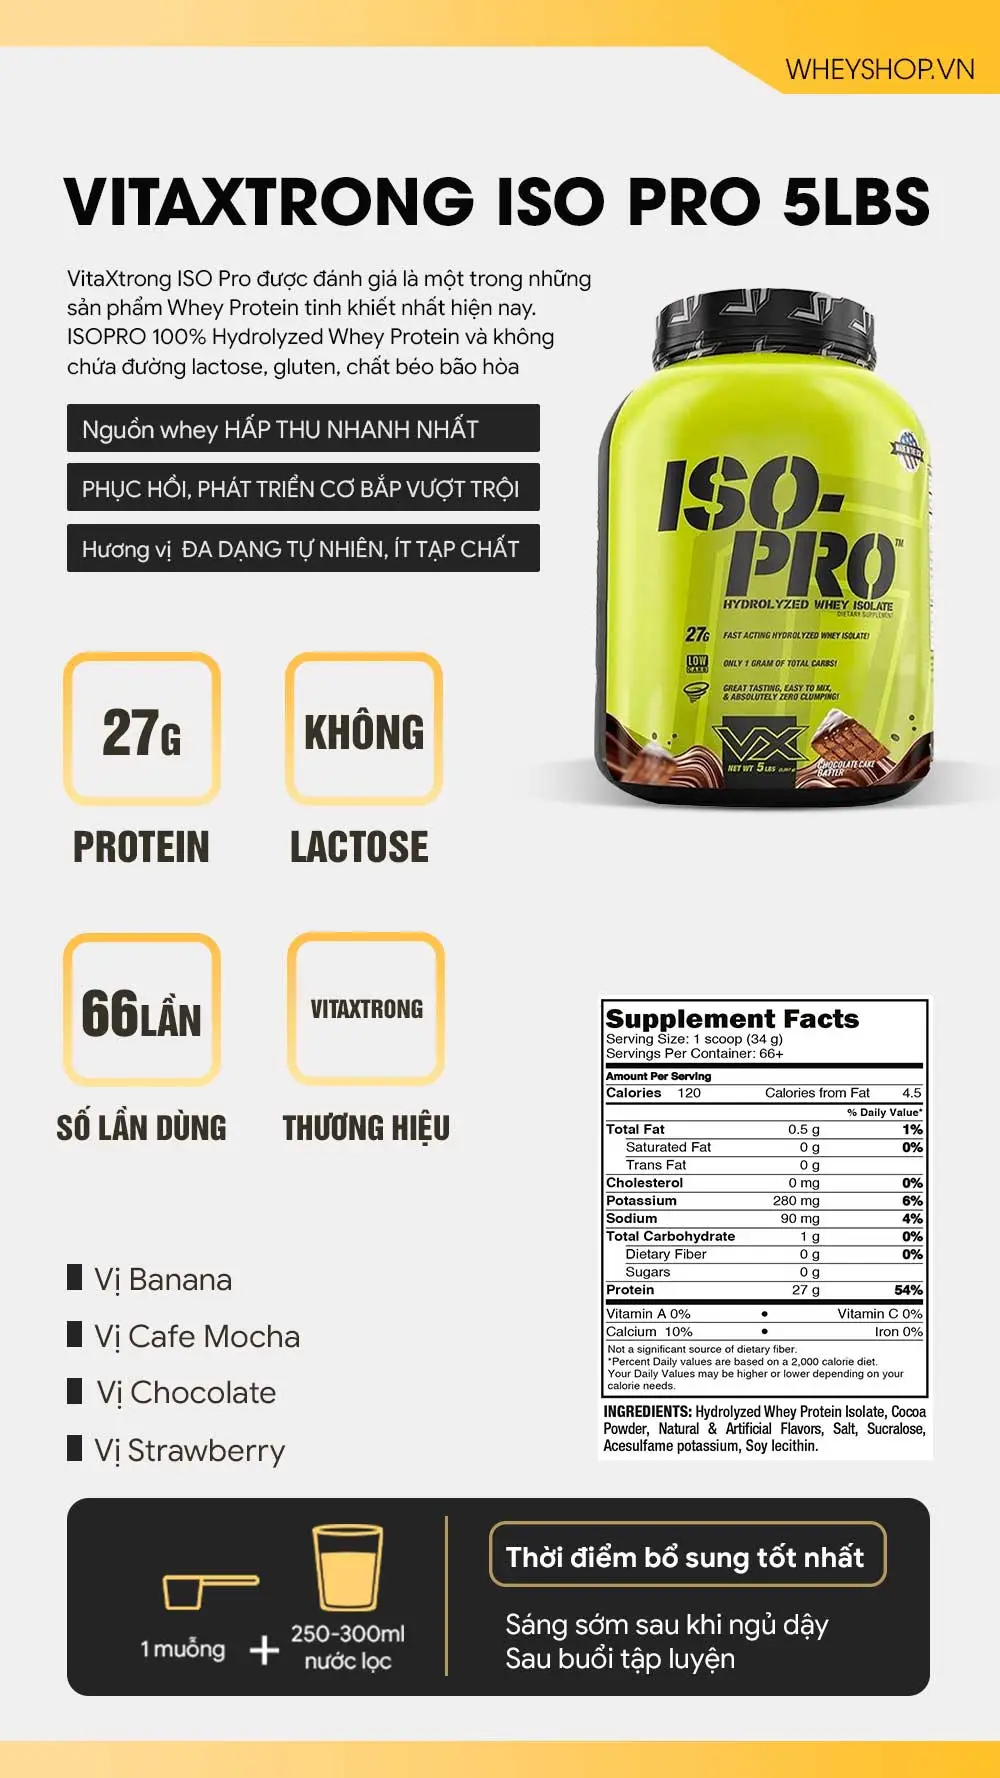 vitaxtrong-iso-pro-5lbs-2-3kg